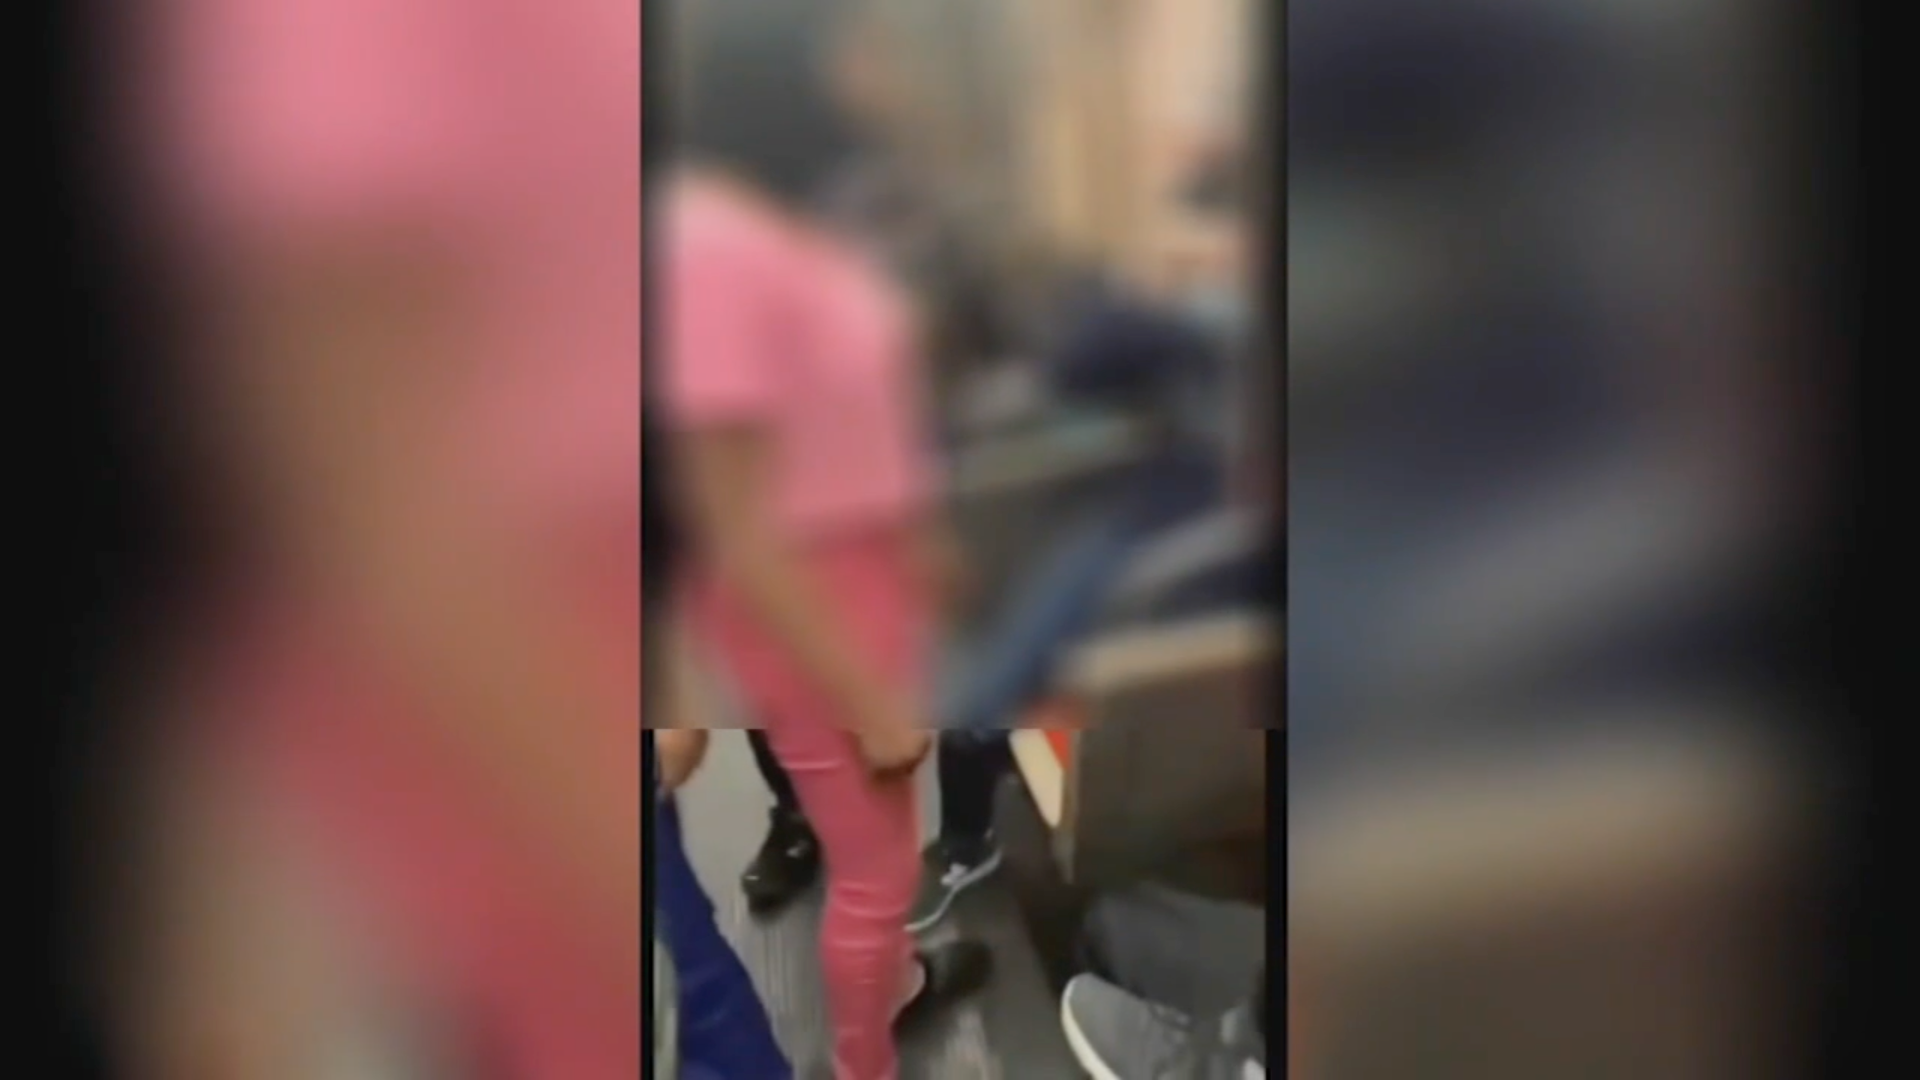 Asian Forced Rape Porn Video - Teens to be charged with ethnic intimidation for attacking Asian students  on SEPTA - WHYY